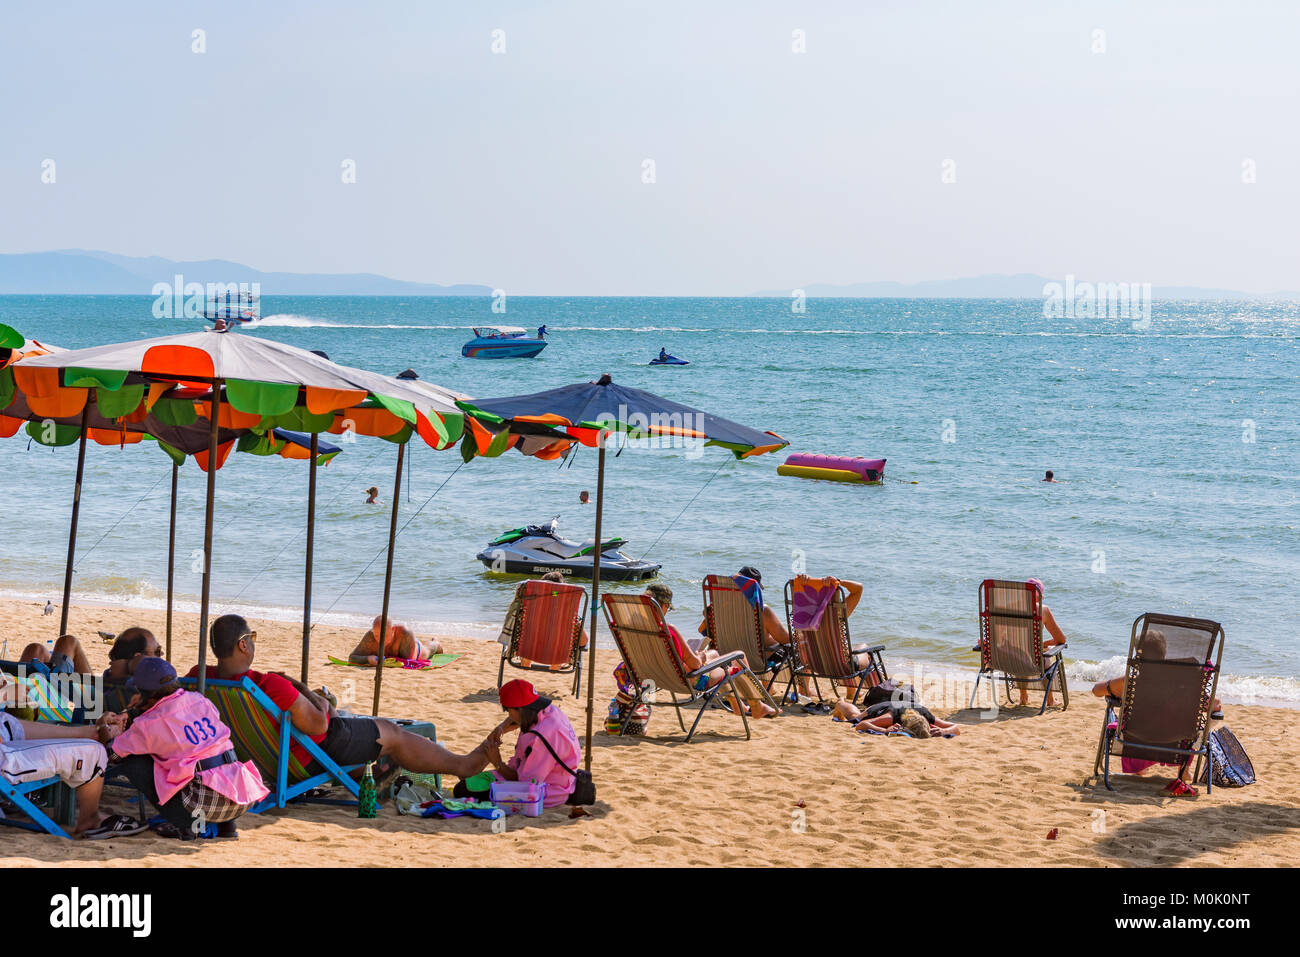 PATTAYA, THAILAND - JANUARY 24: This is Jomtien beach, a popular beach for travellers and locals on January 24, 2017 in Pattaya Stock Photo